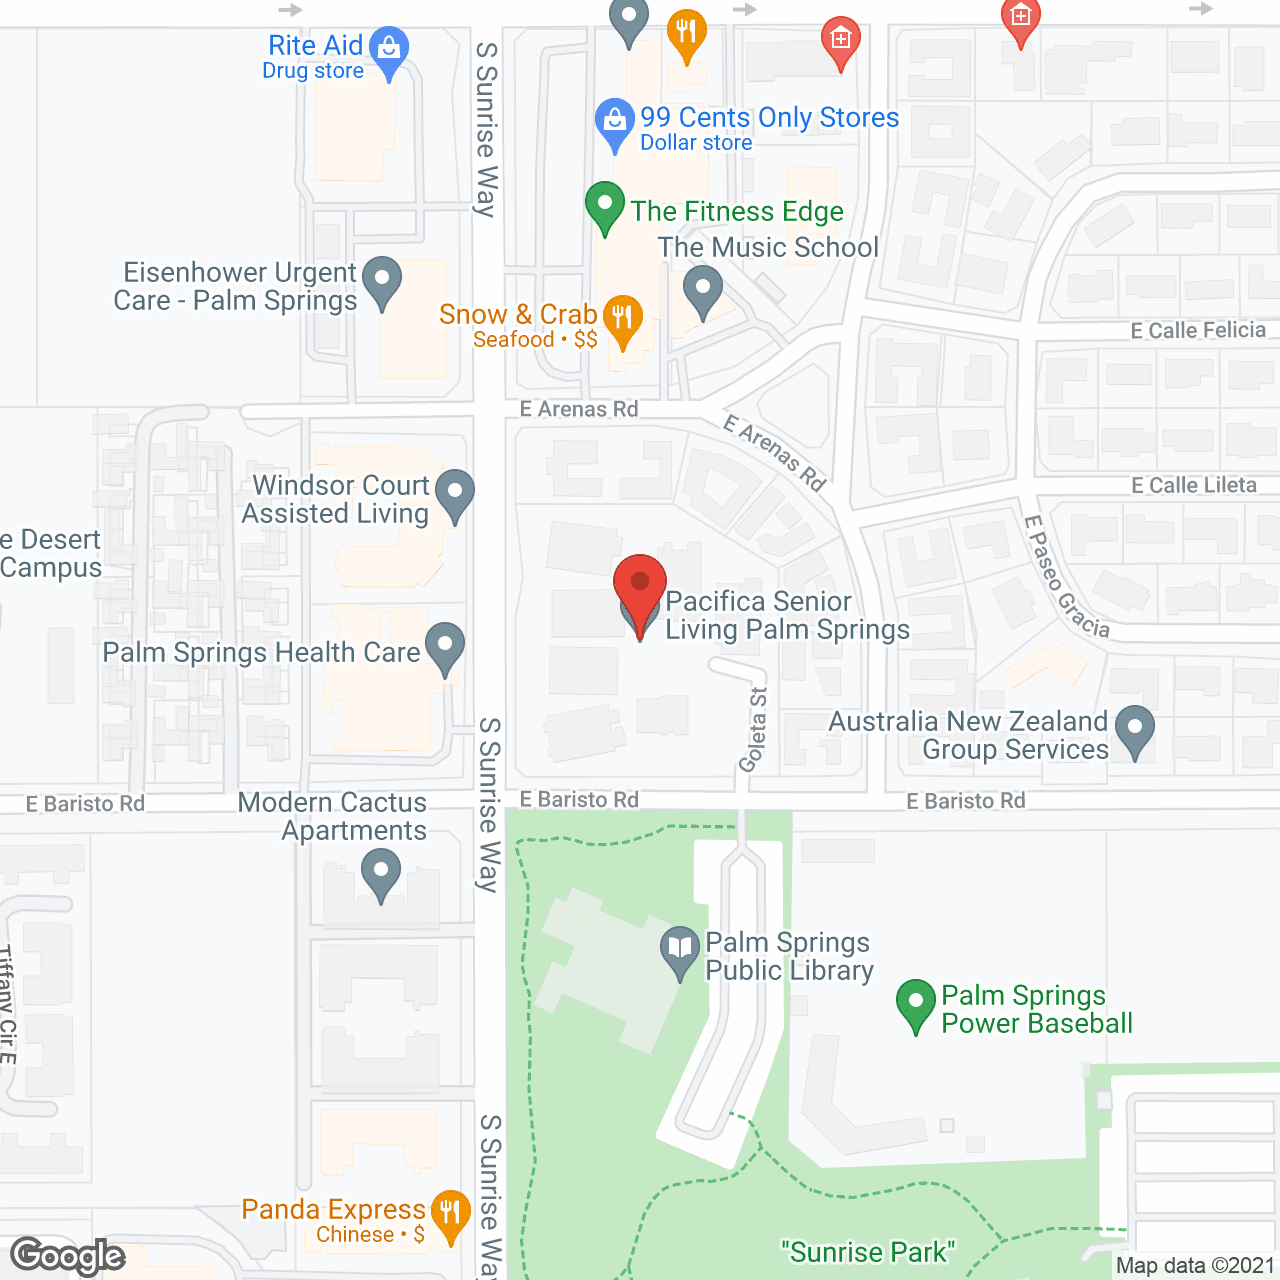 Pacifica Senior Living Palm Springs in google map